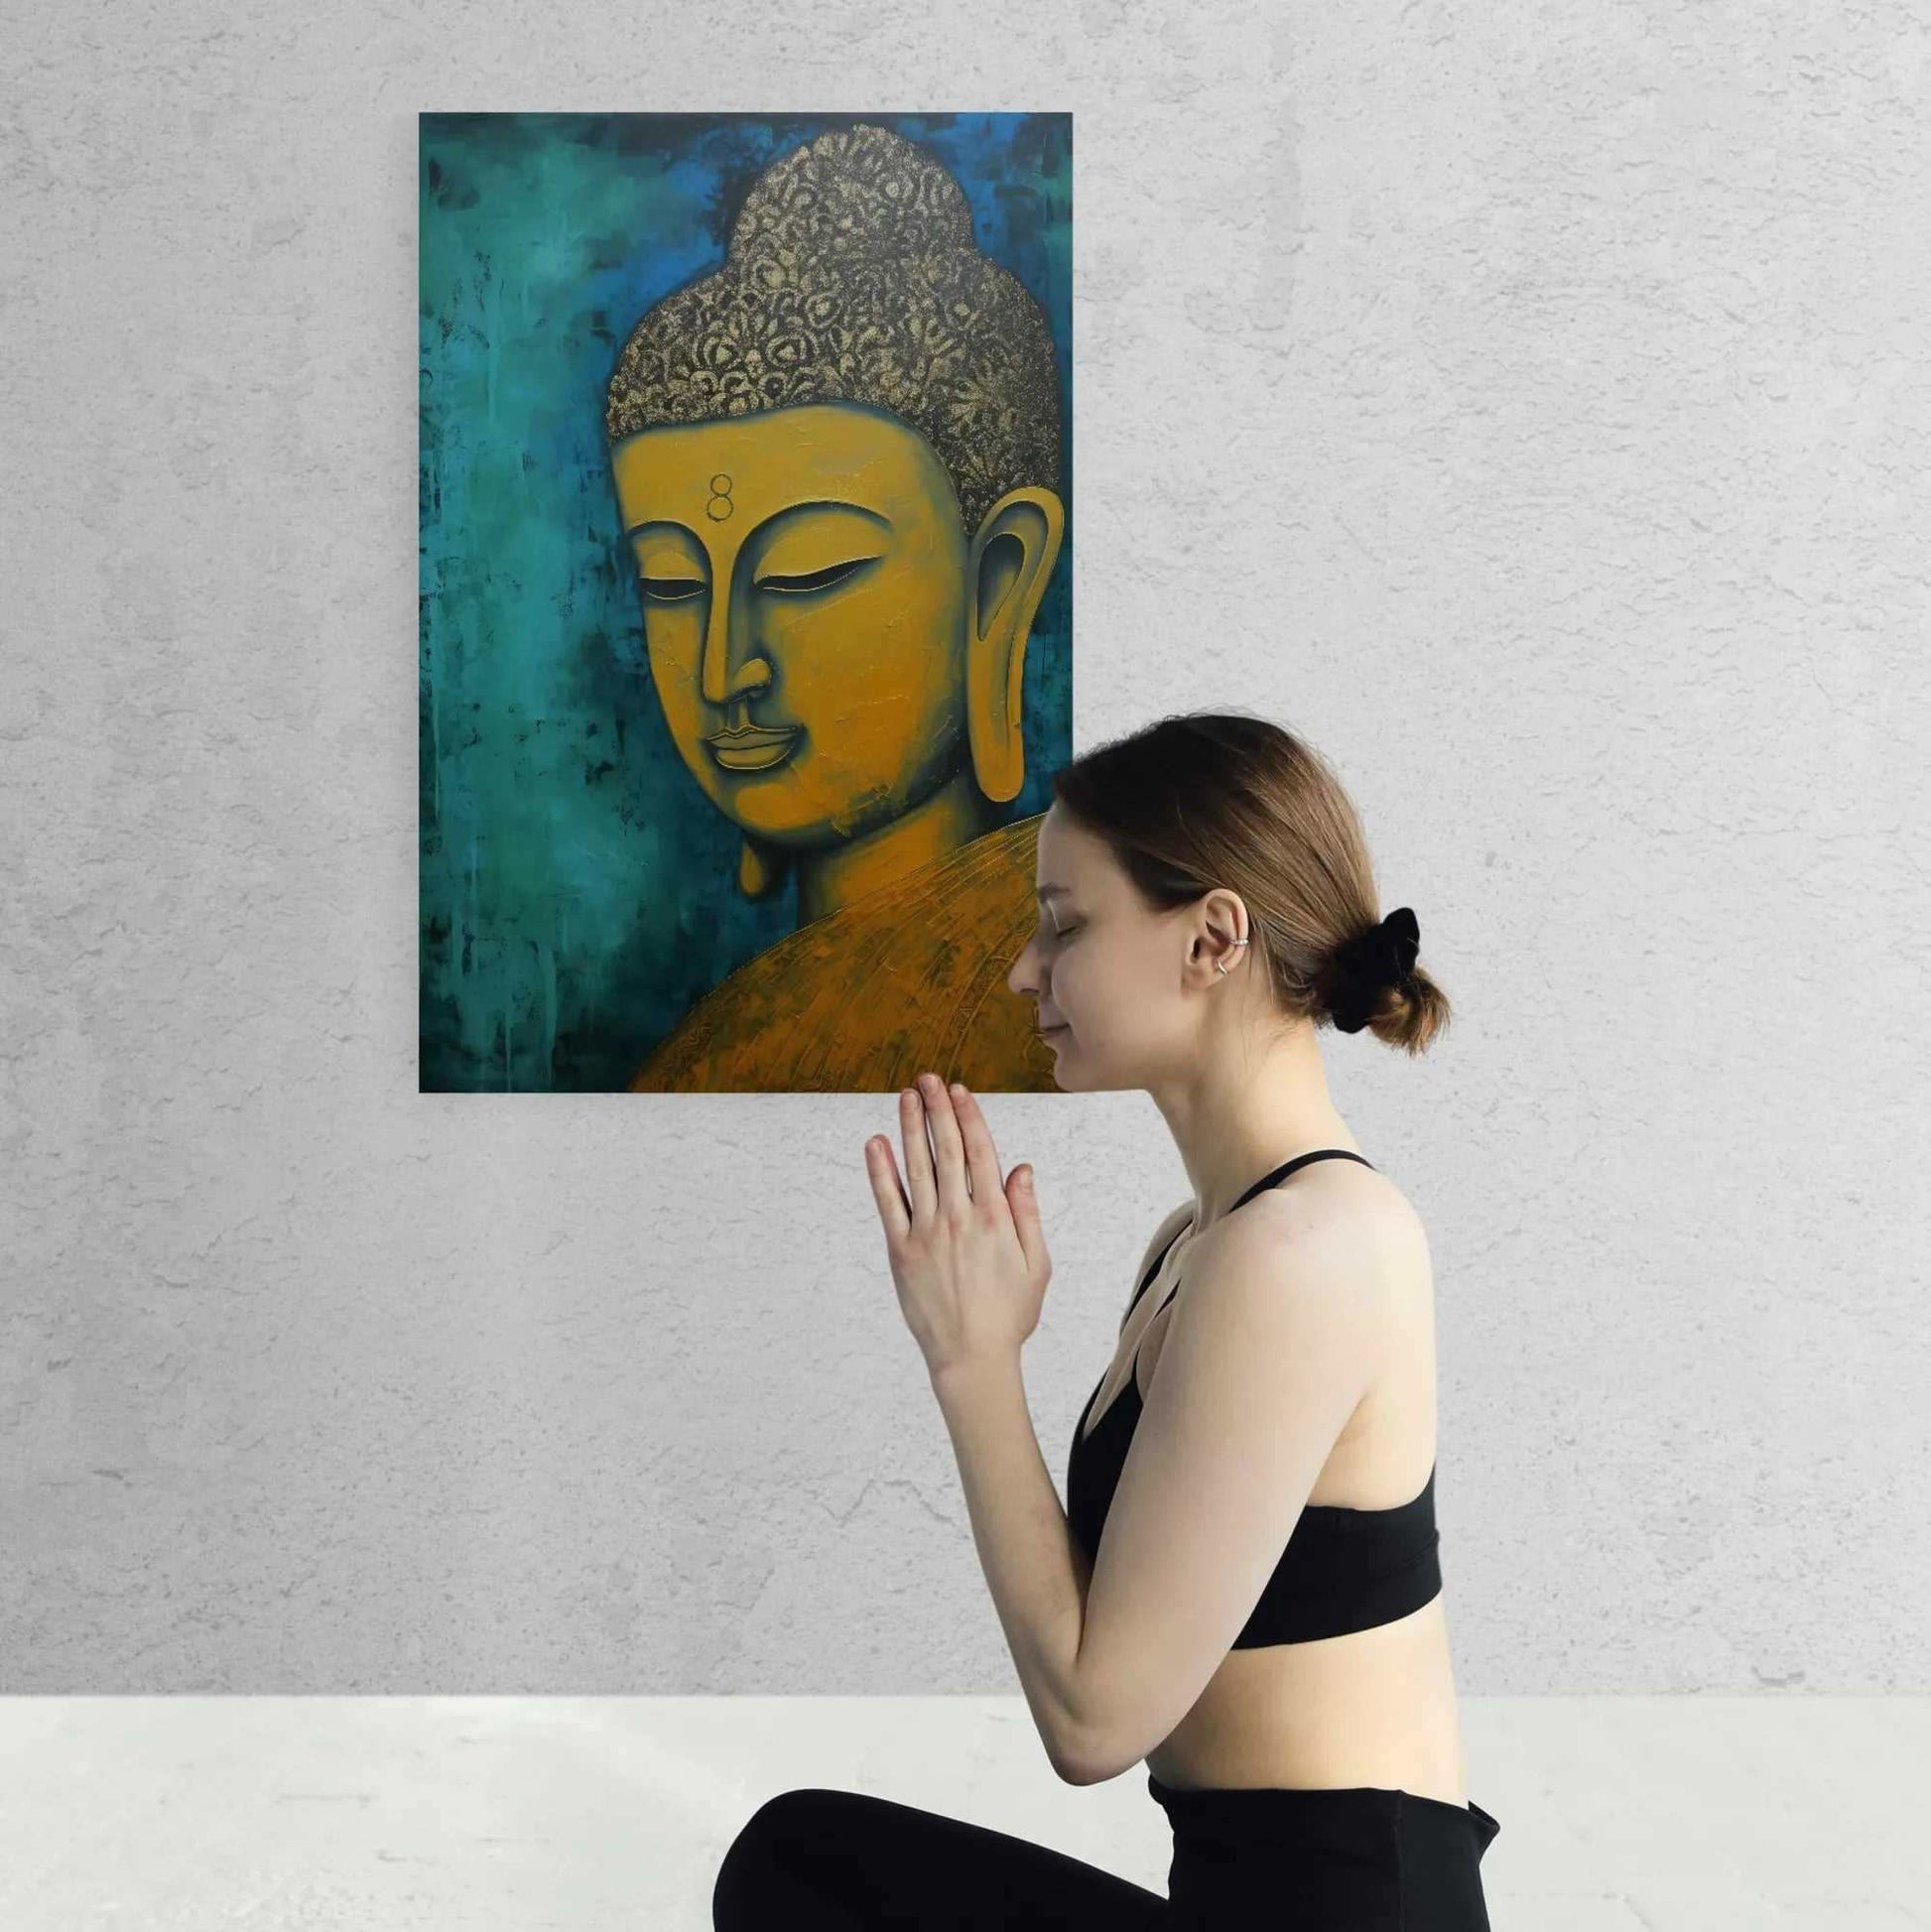 A woman in a meditative pose in front of a golden Buddha artwork with a calming blue and gold color scheme.